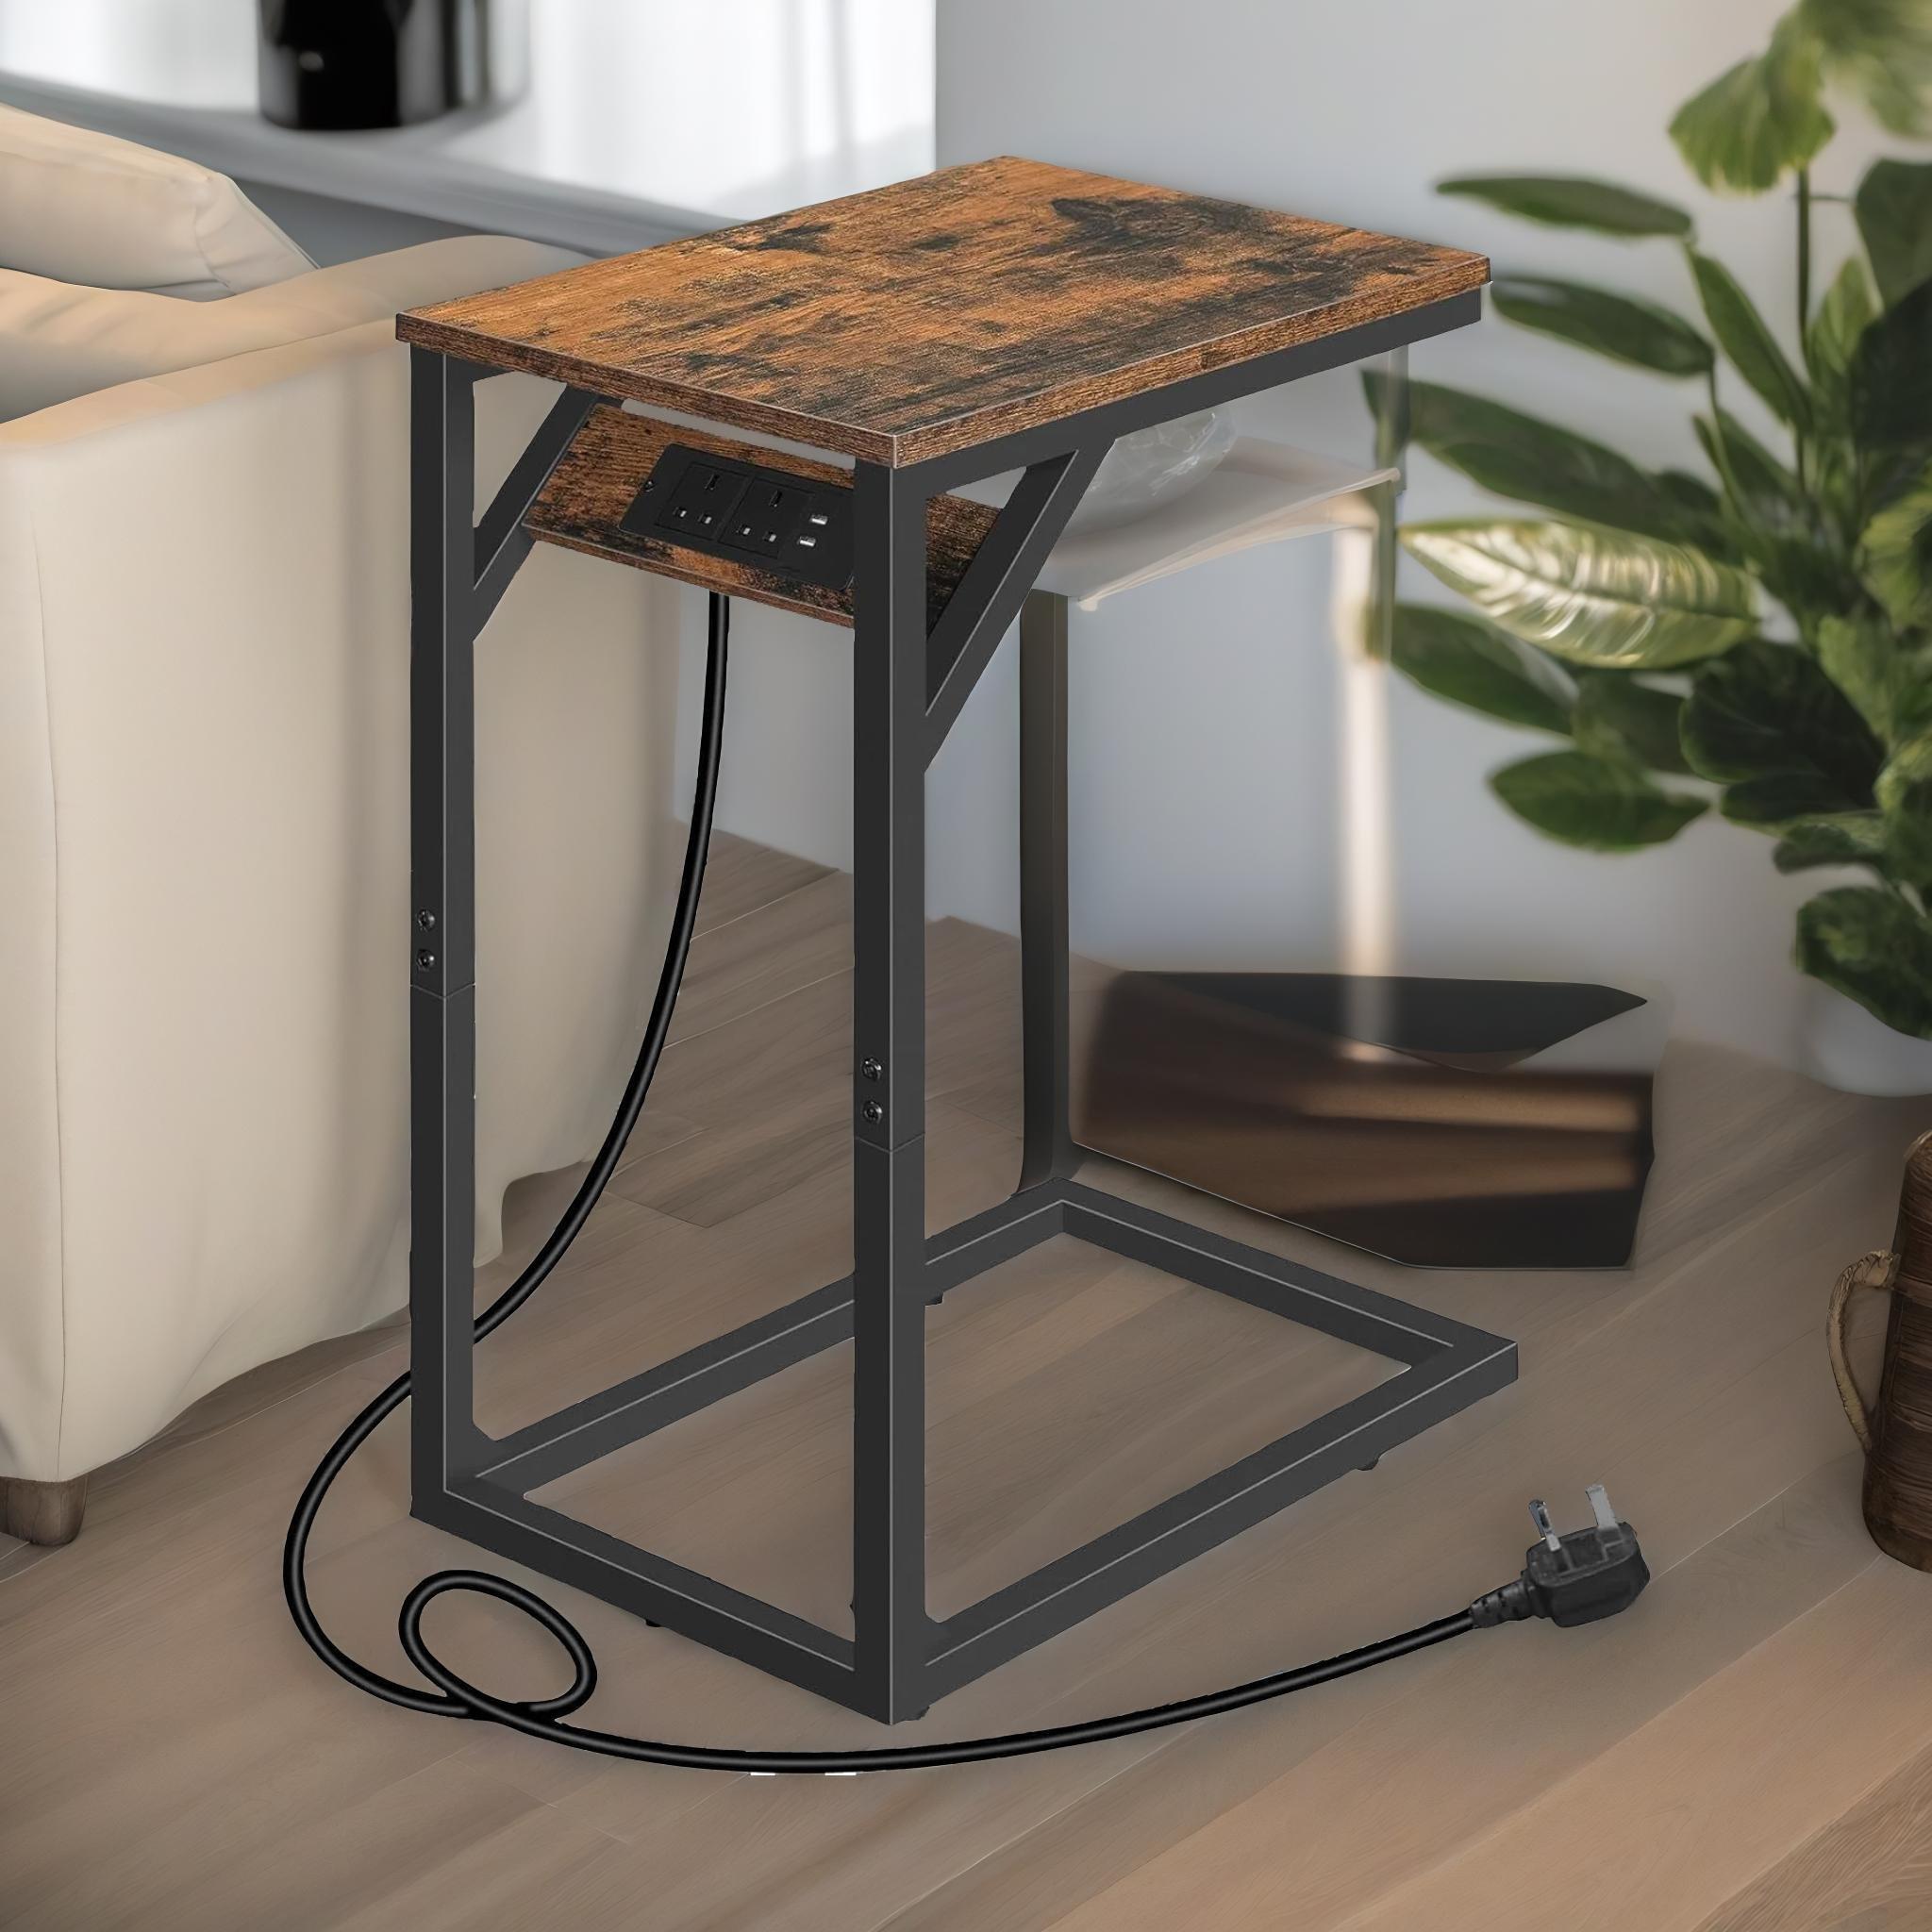 C Shaped Table With USB Ports & Power Outlets